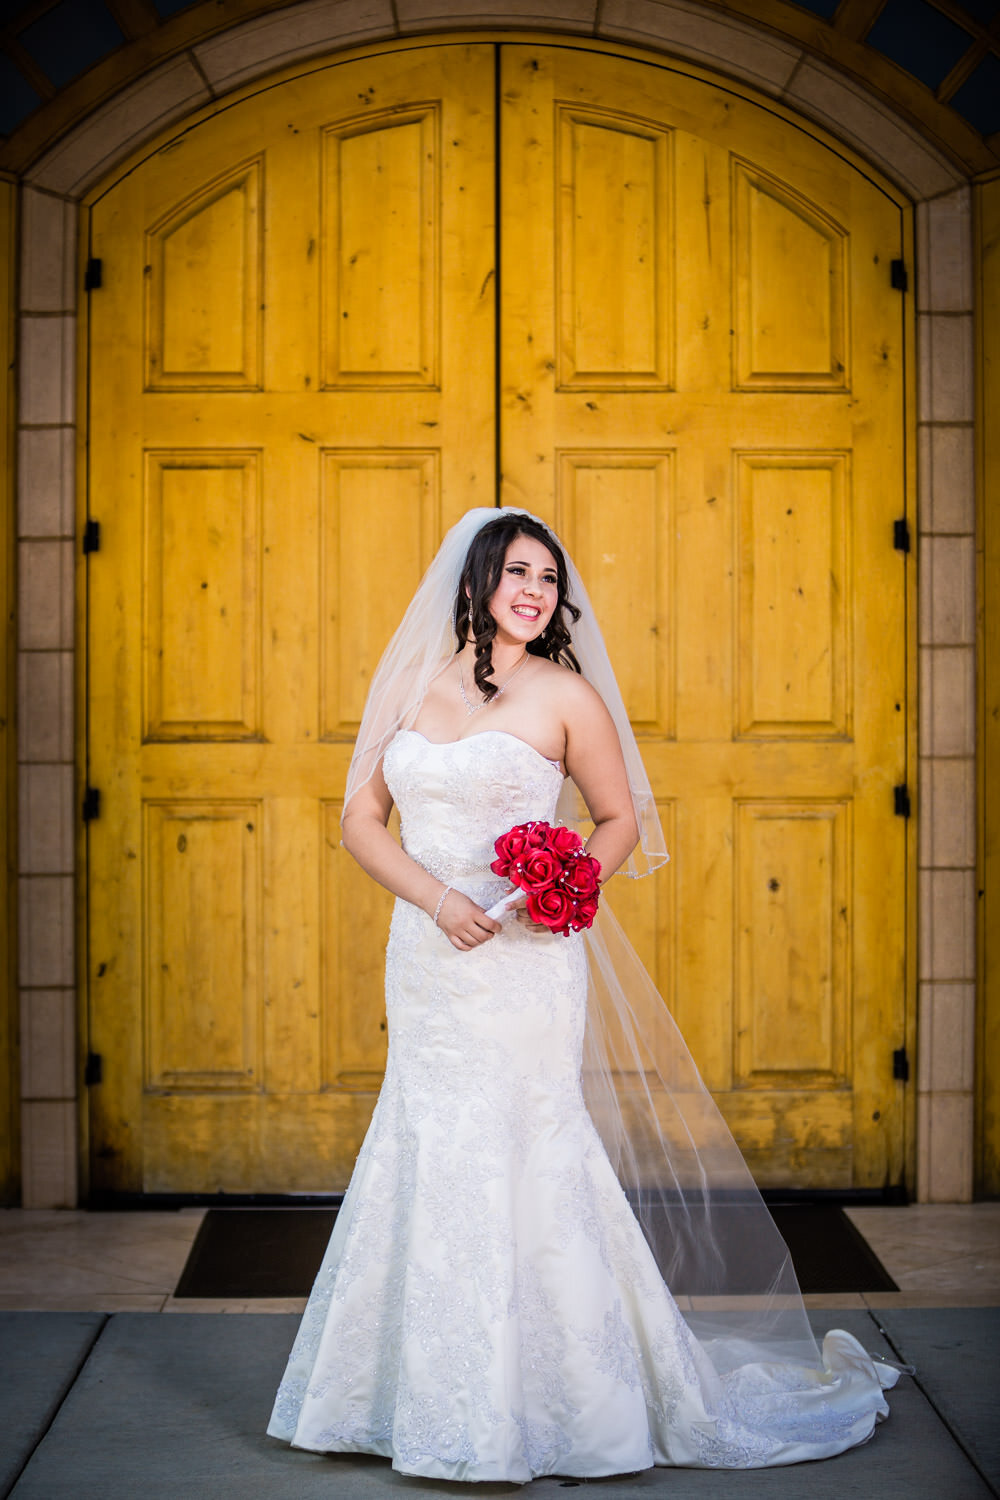  Blackstone Country Club wedding by JMGant Photography. I absolutely LOVE the front door of this place!&nbsp; 